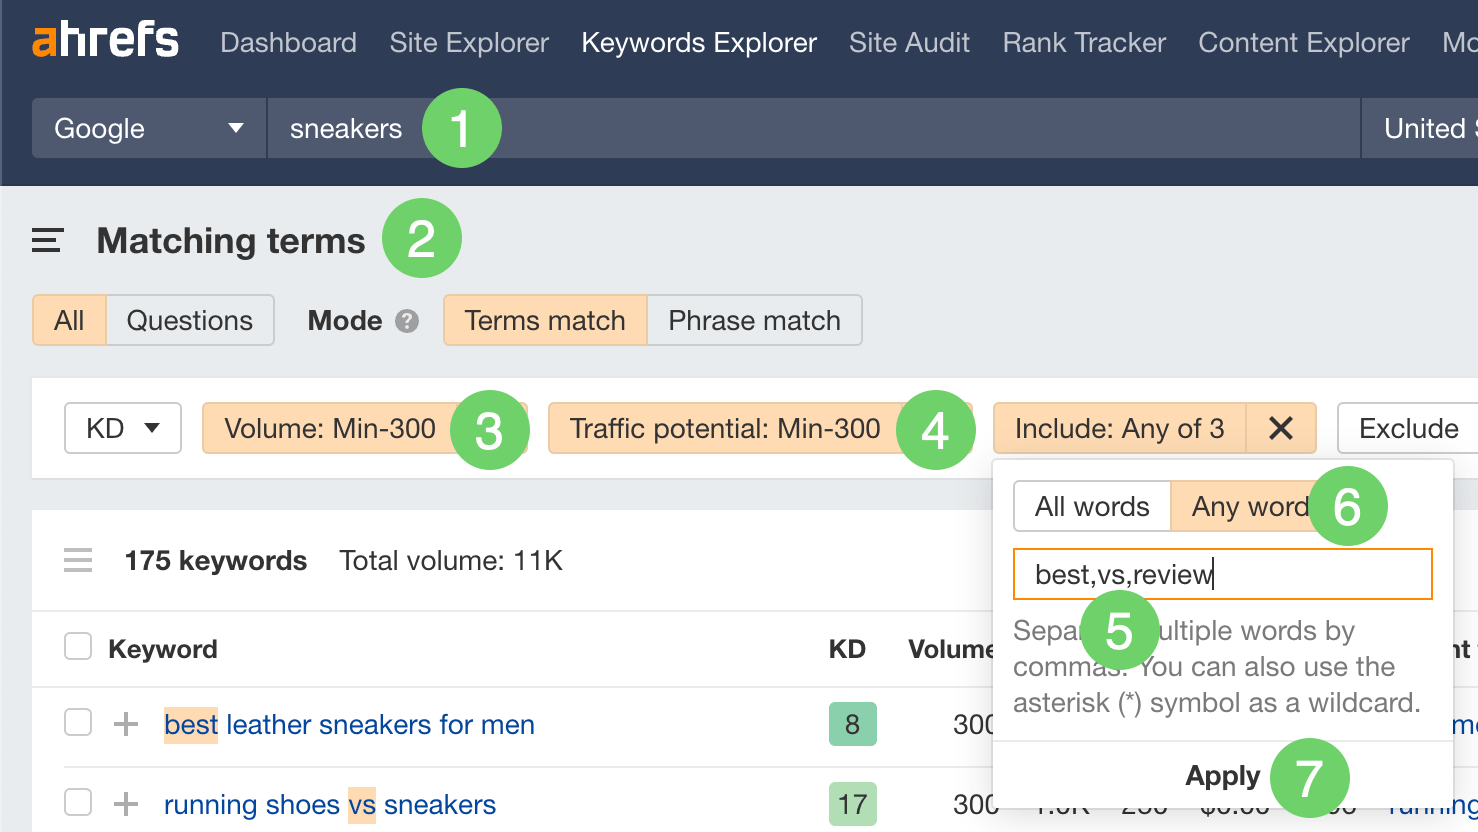 Filtering for long-tail keywords related to sneakers that contain the word "best," "vs," or "review" in Ahrefs' Keywords Explorer